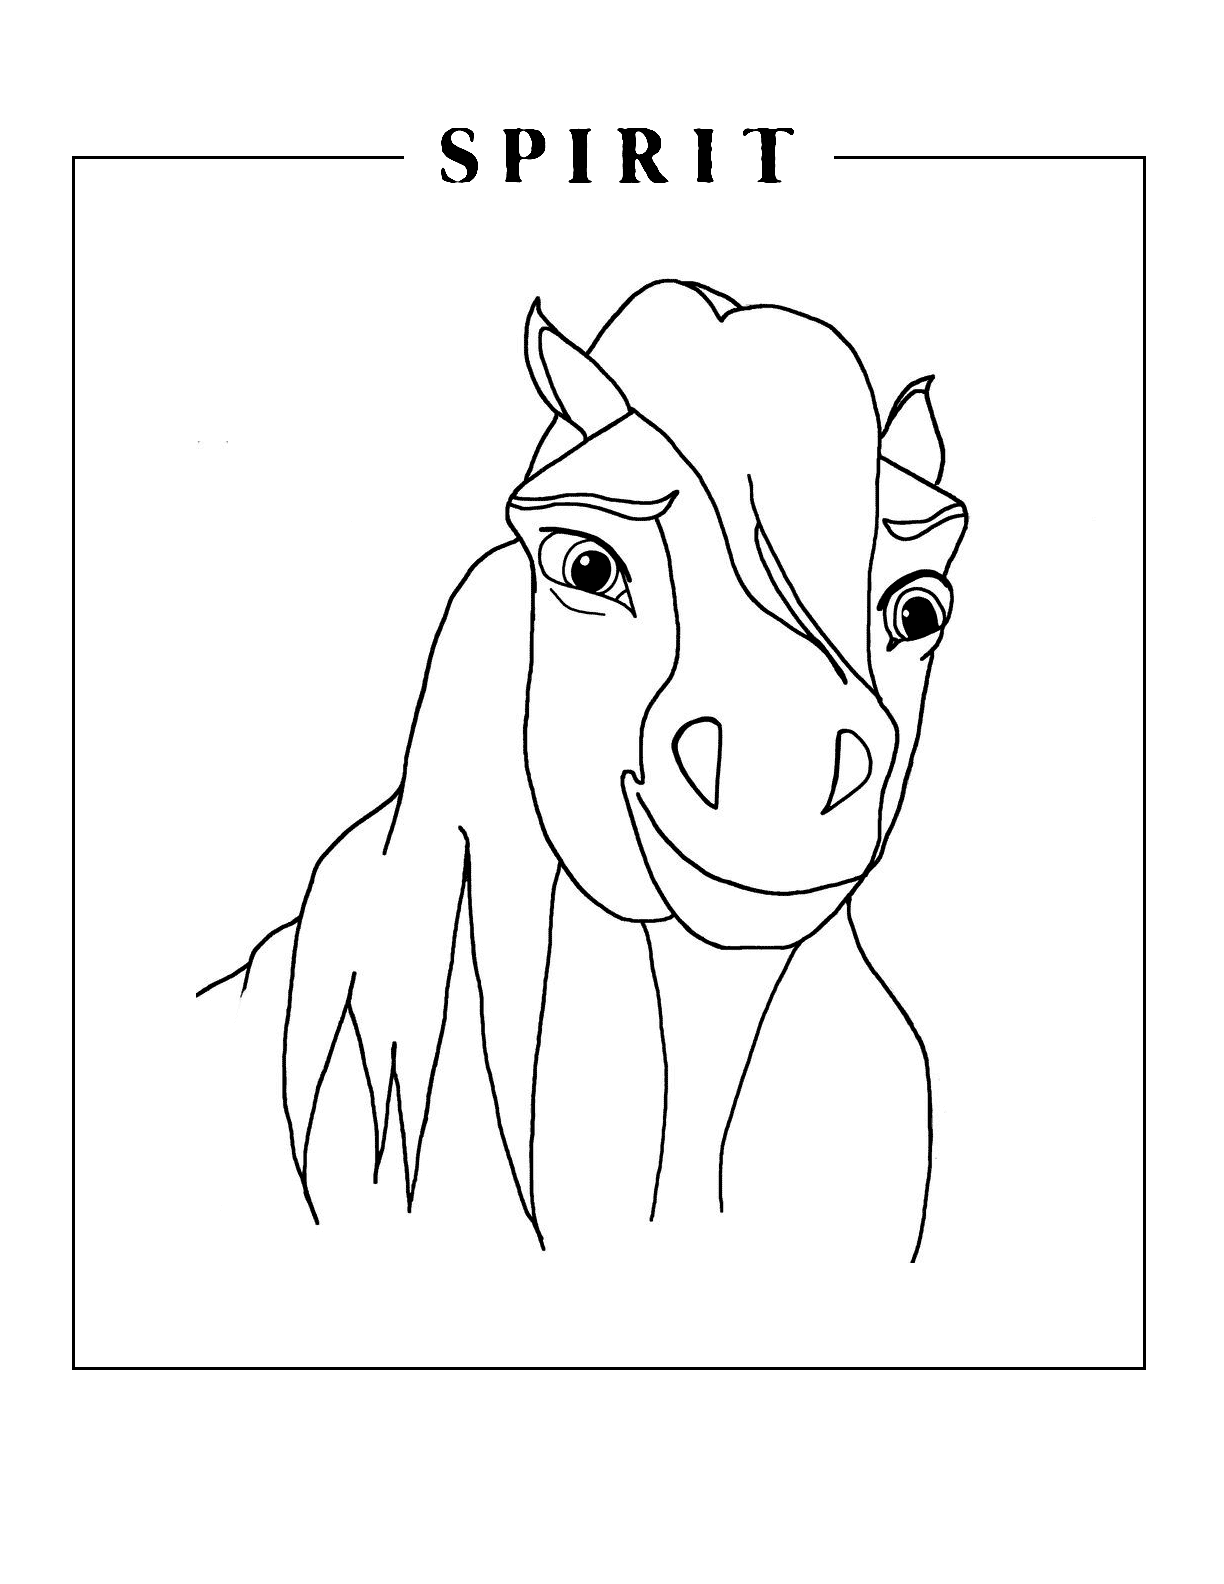 Cute Spirit Coloring Page